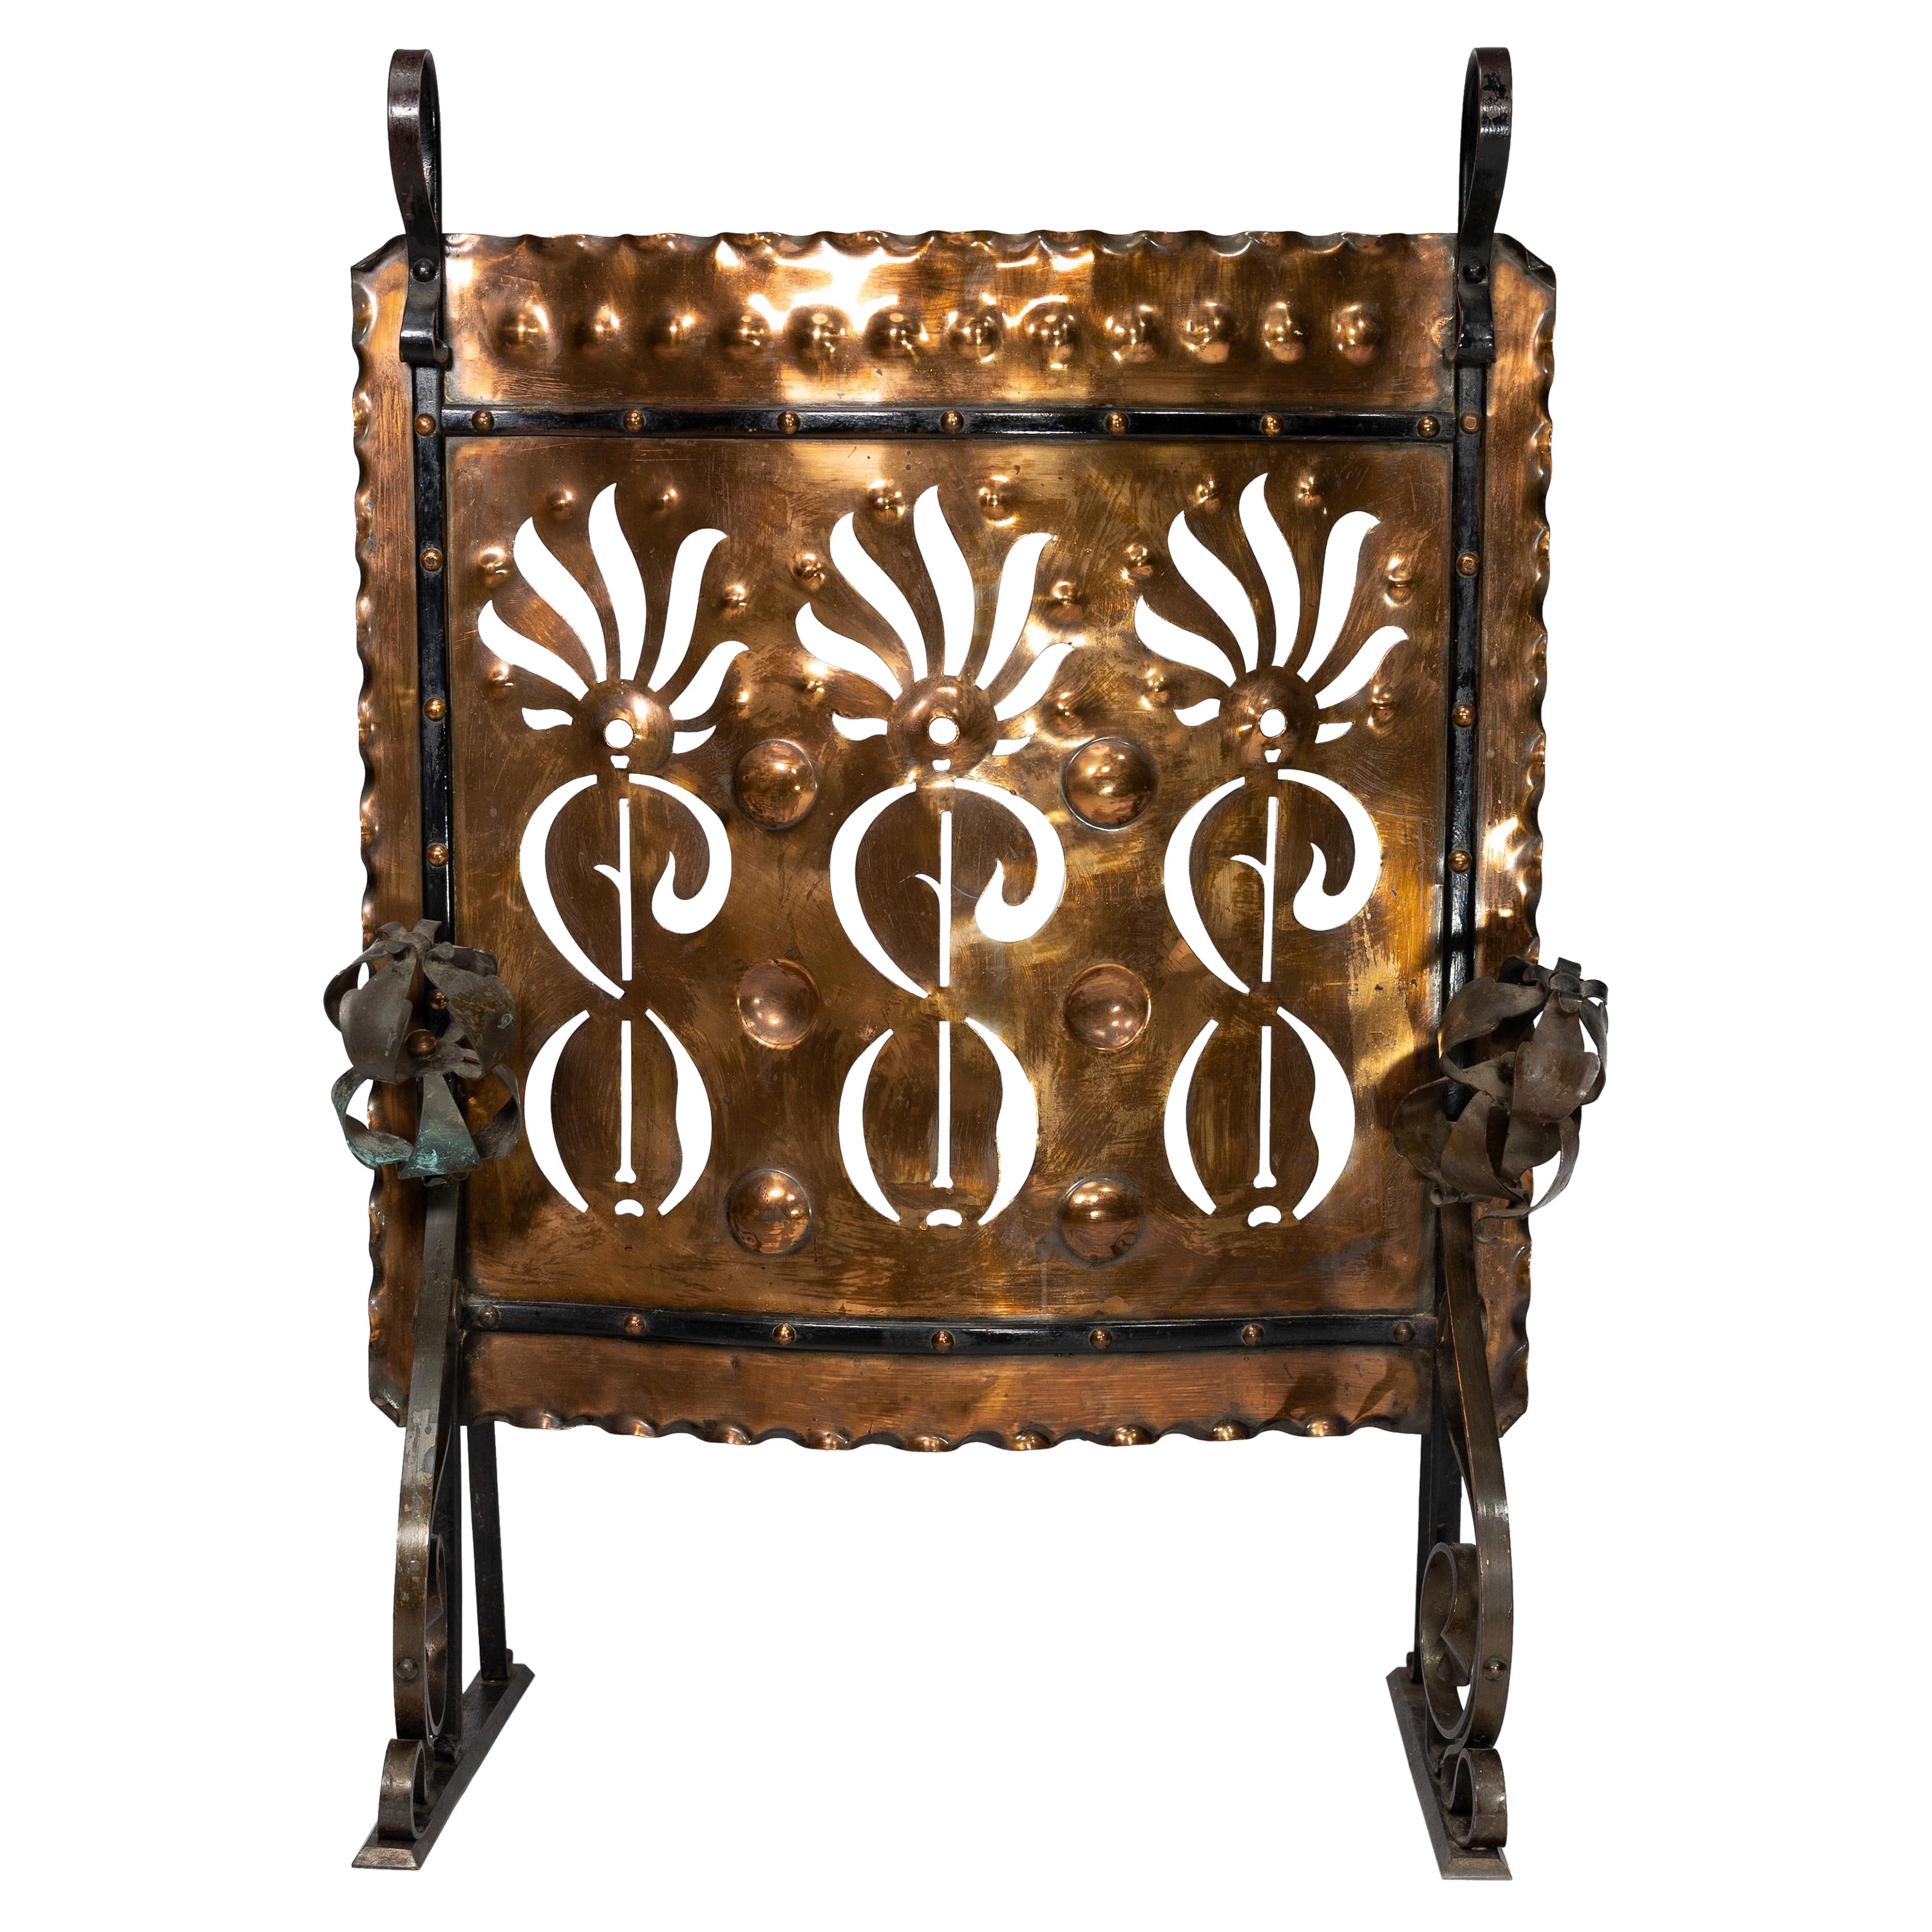 Liberty and Co. An Arts and Crafts wrought iron and copper firescreen with perced floral decoration and flower heads to the front with scrolled iron work to the frame and feet.
